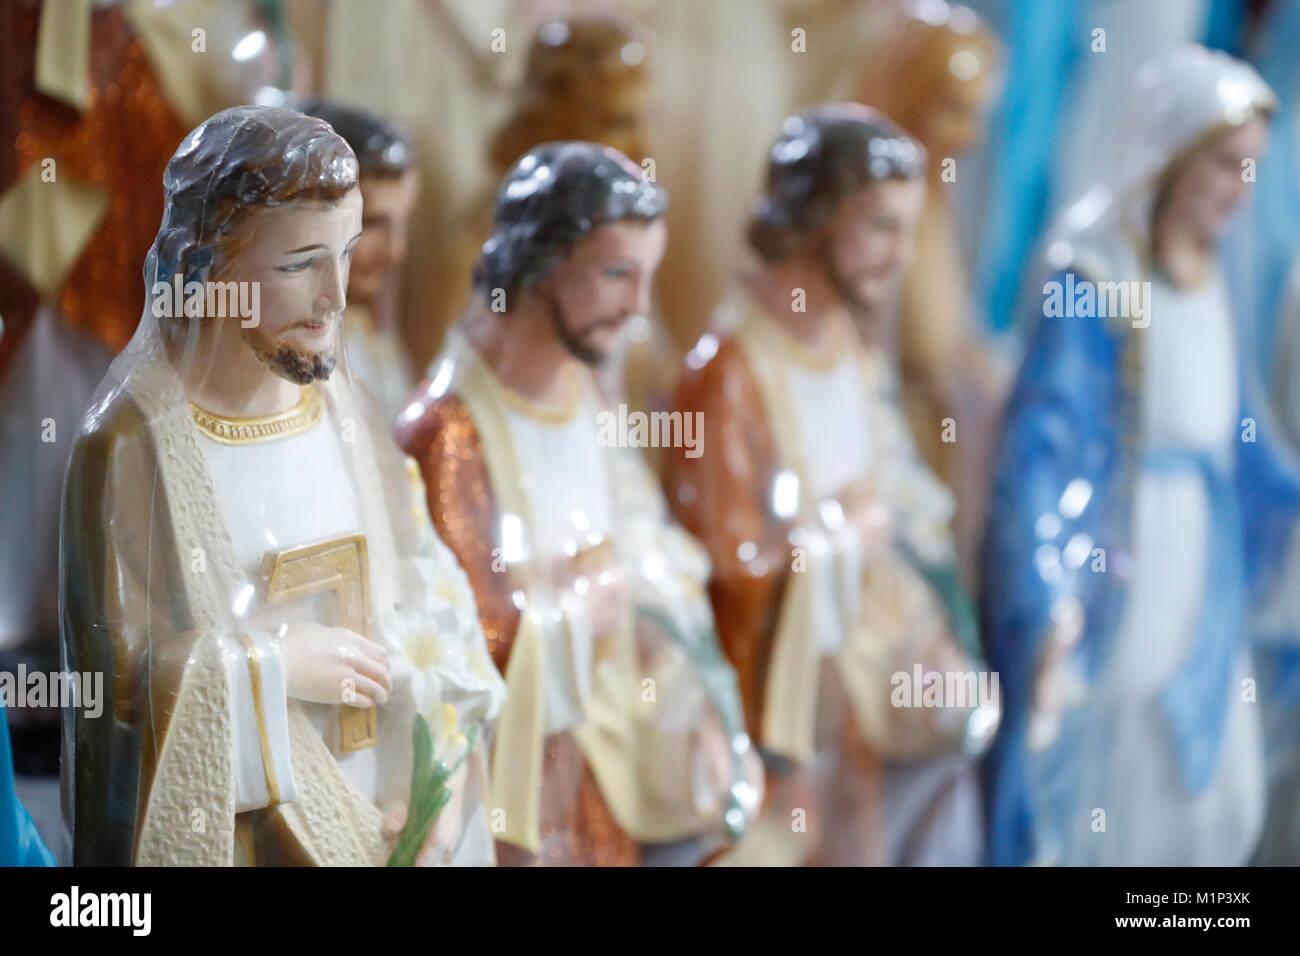 Shop selling religious Christian items including statues of Jesus, Ho Chi Minh City, Vietnam, Indochina, Southeast Asia, Asia Stock Photo